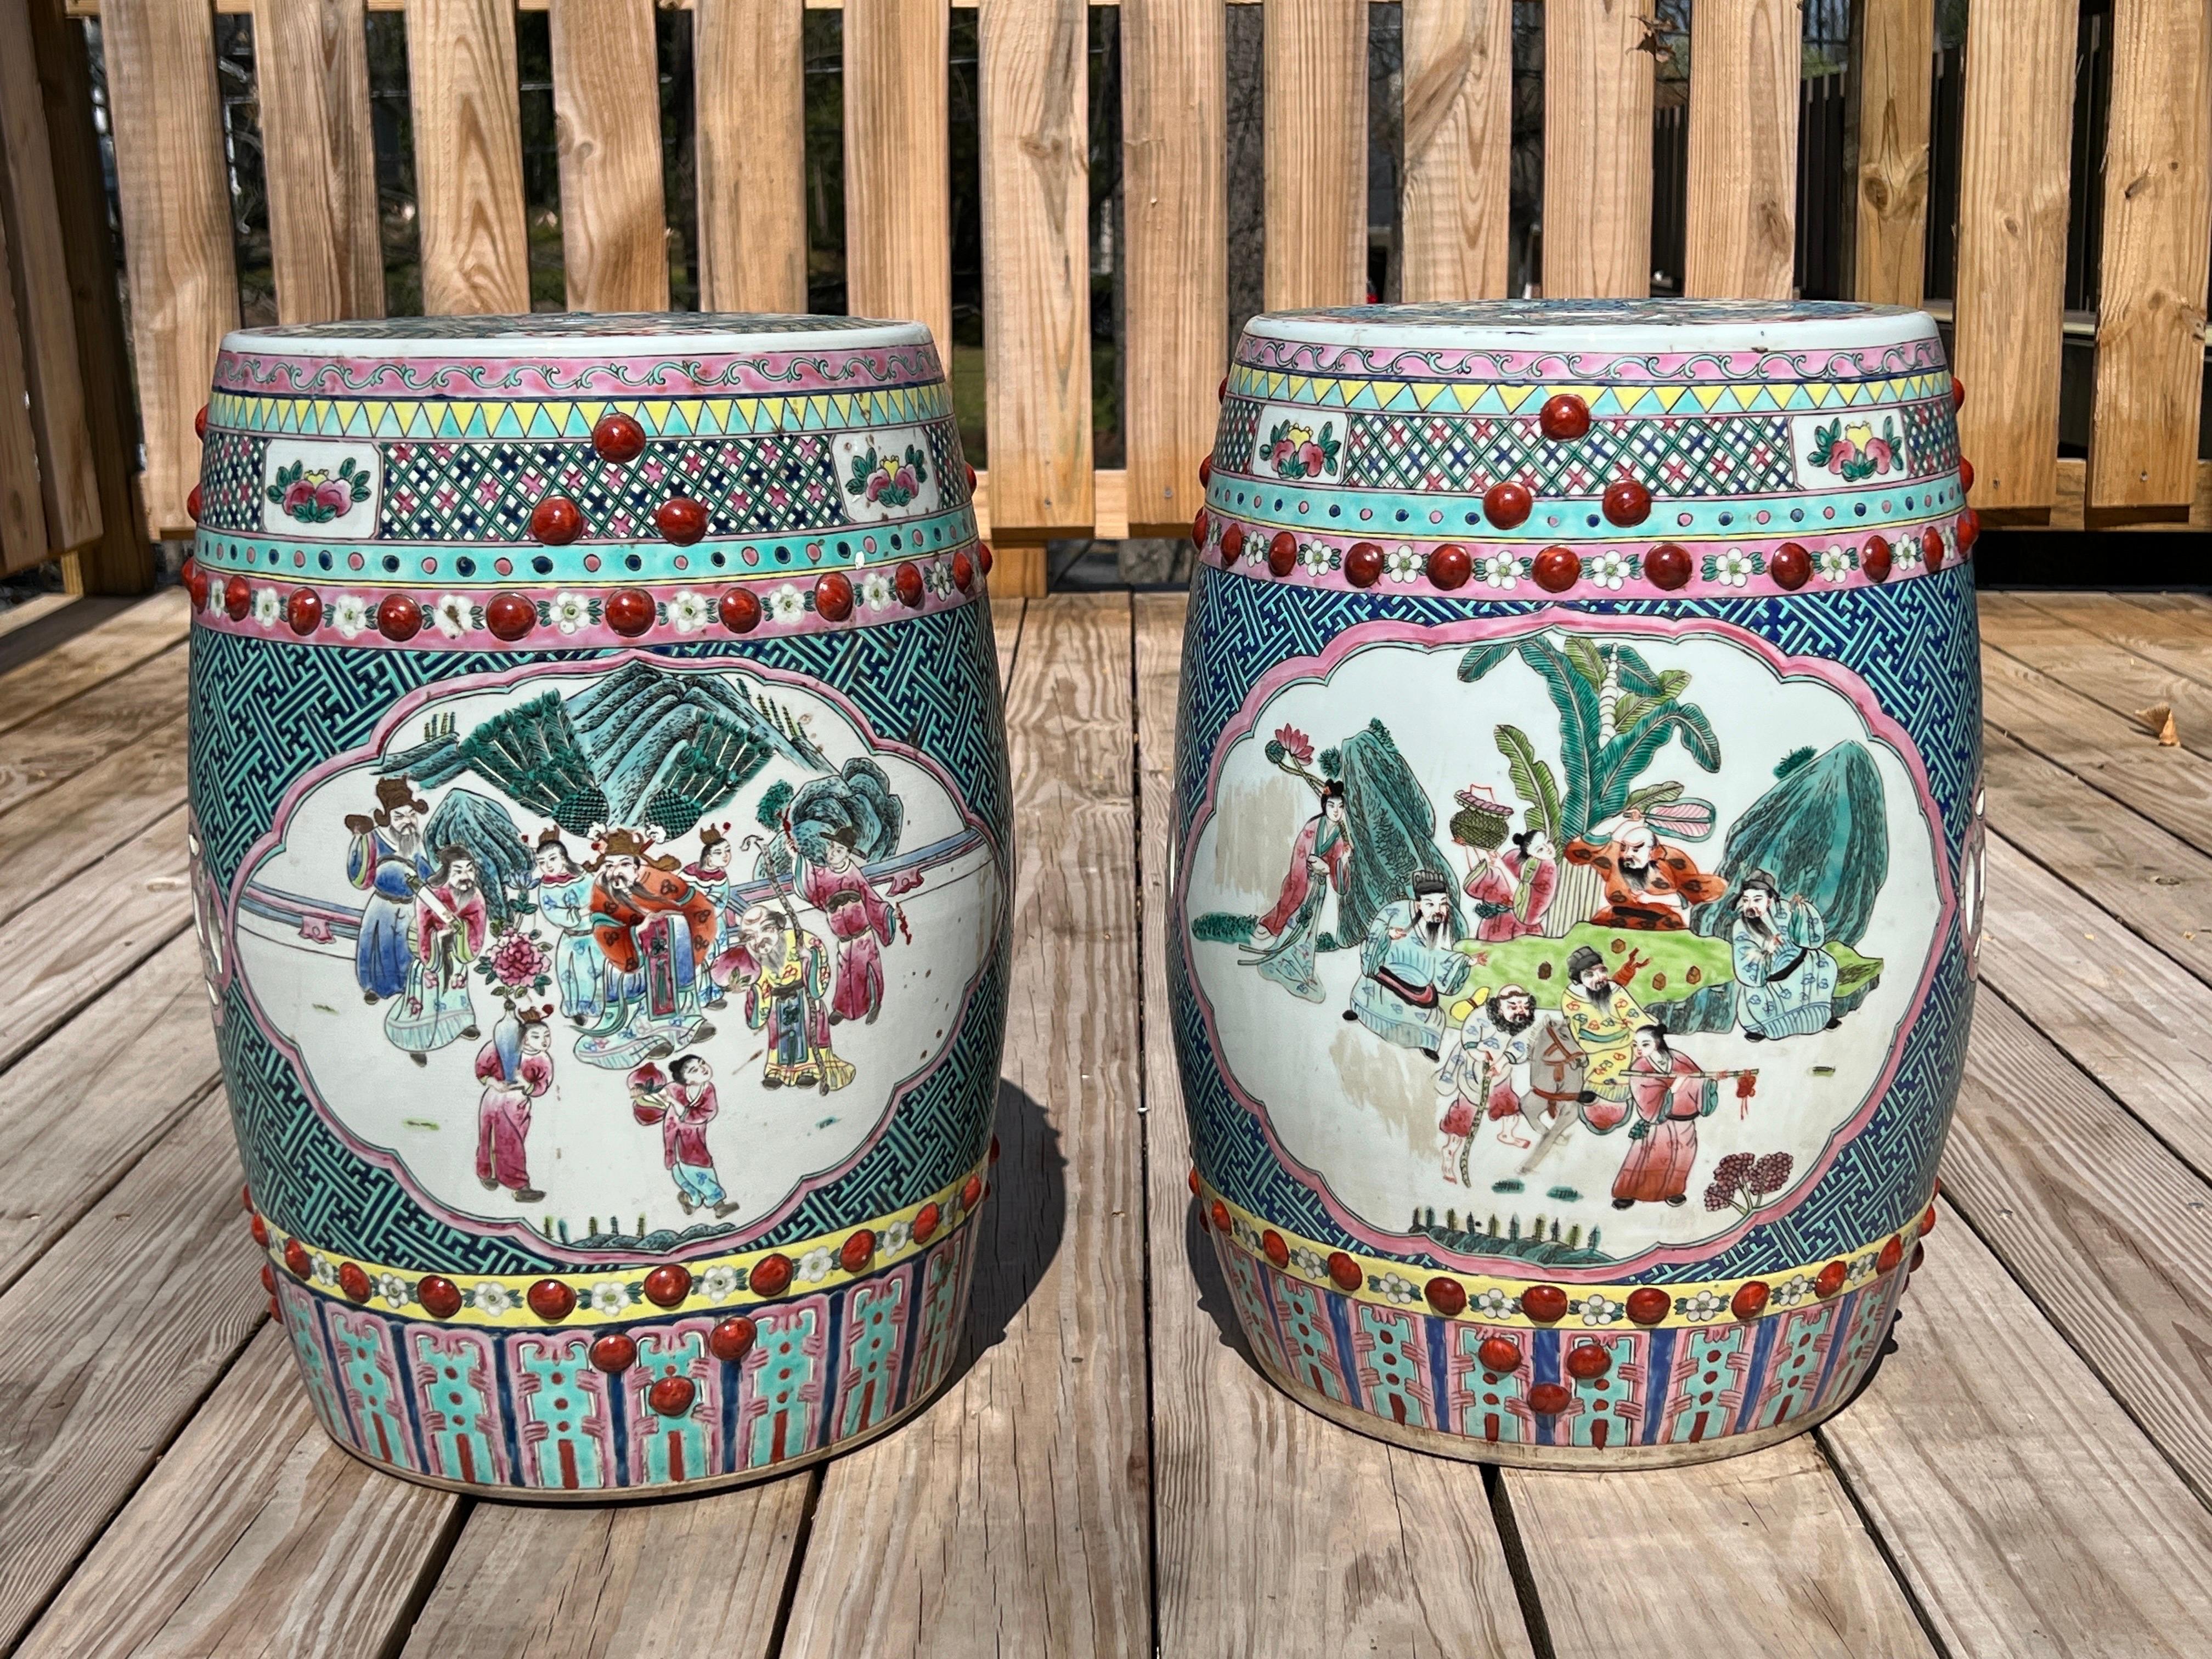 Chinese, early to mid 20th century.

A pair of likely mid century Chinese porcelain garden stools. Each stool features enamel decorated surfaces of figural windows, landscapes and precious objects. 
A Famille Rose motif exudes an array of colors to